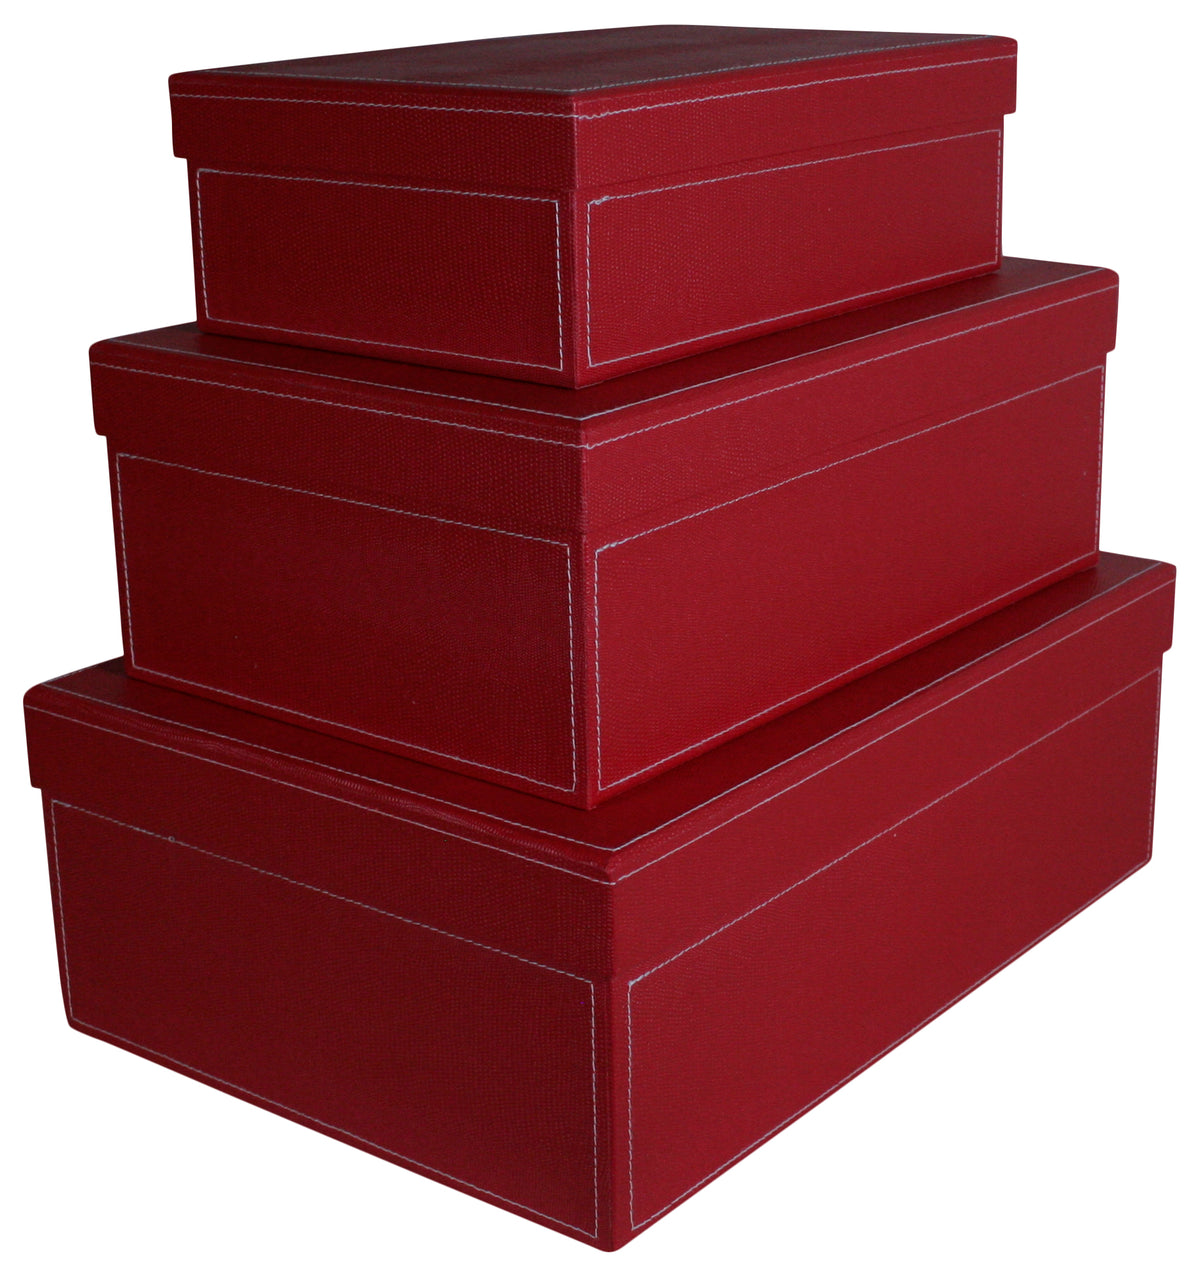 Set of 3 Red Rectangular Stacking Boxes w/Lids - 4 PACK